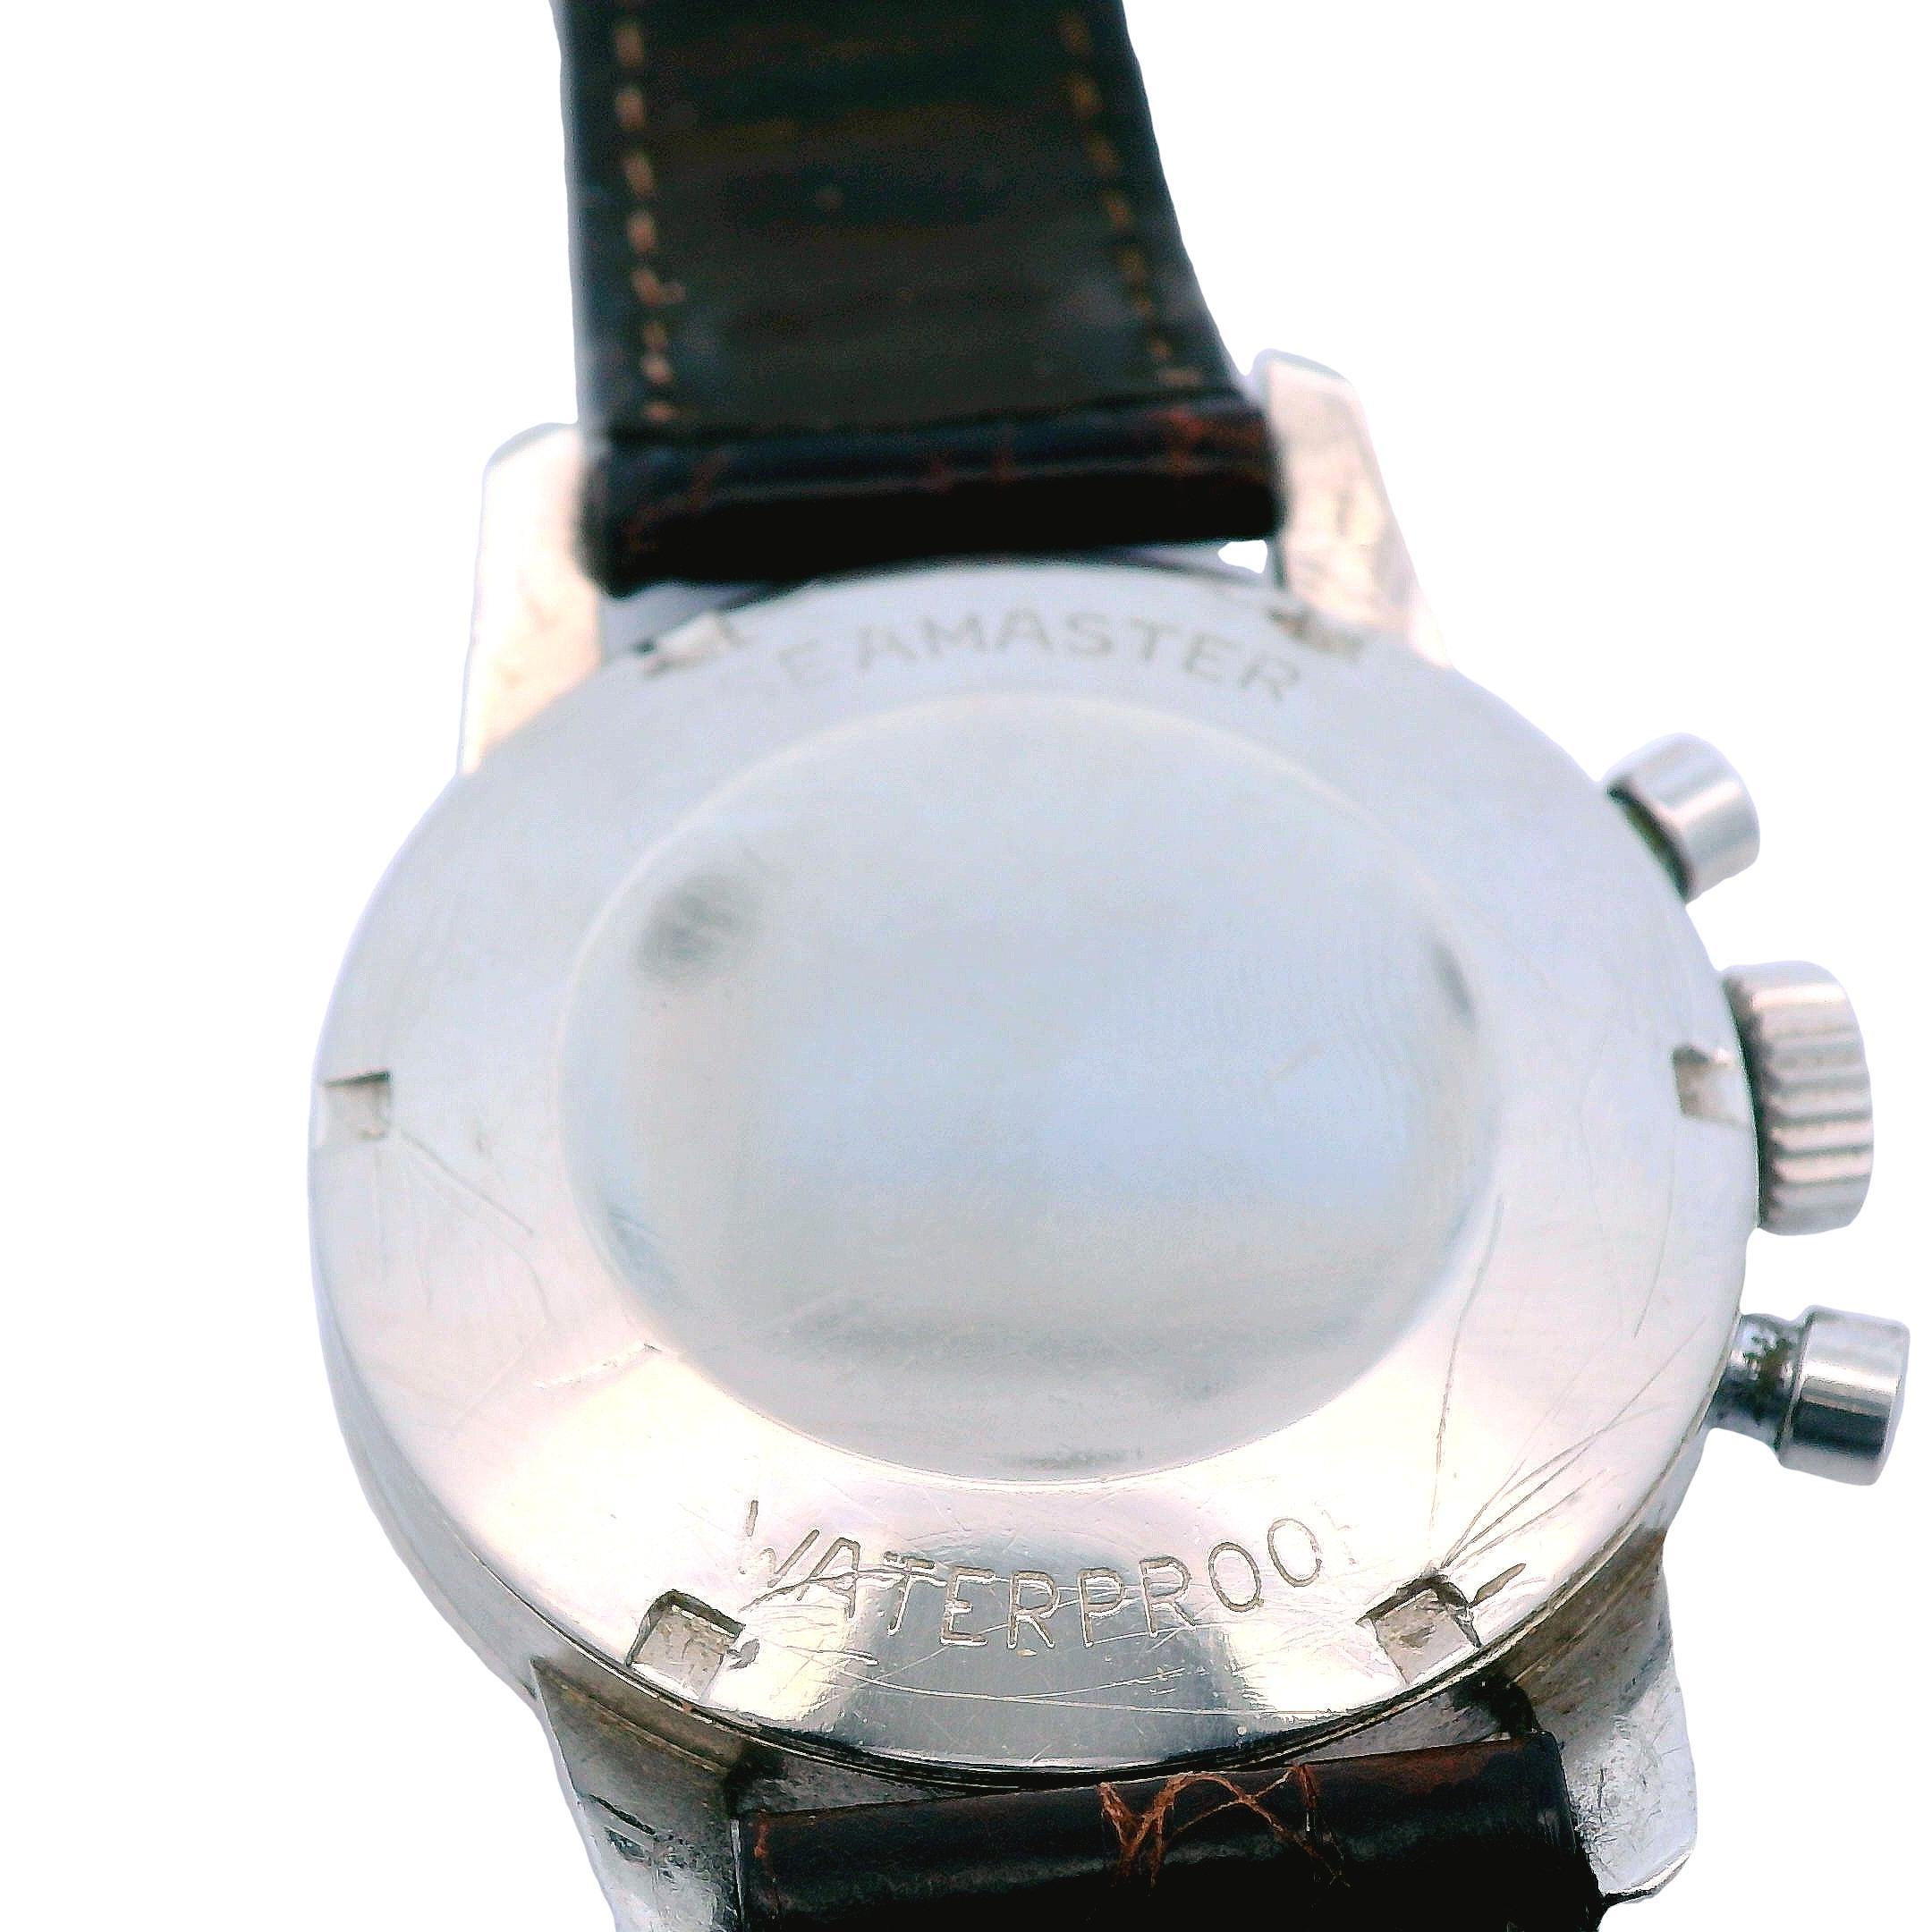 1960s Omega Seamaster Chronograph Watch in Stainless Steel - Running For Sale 3